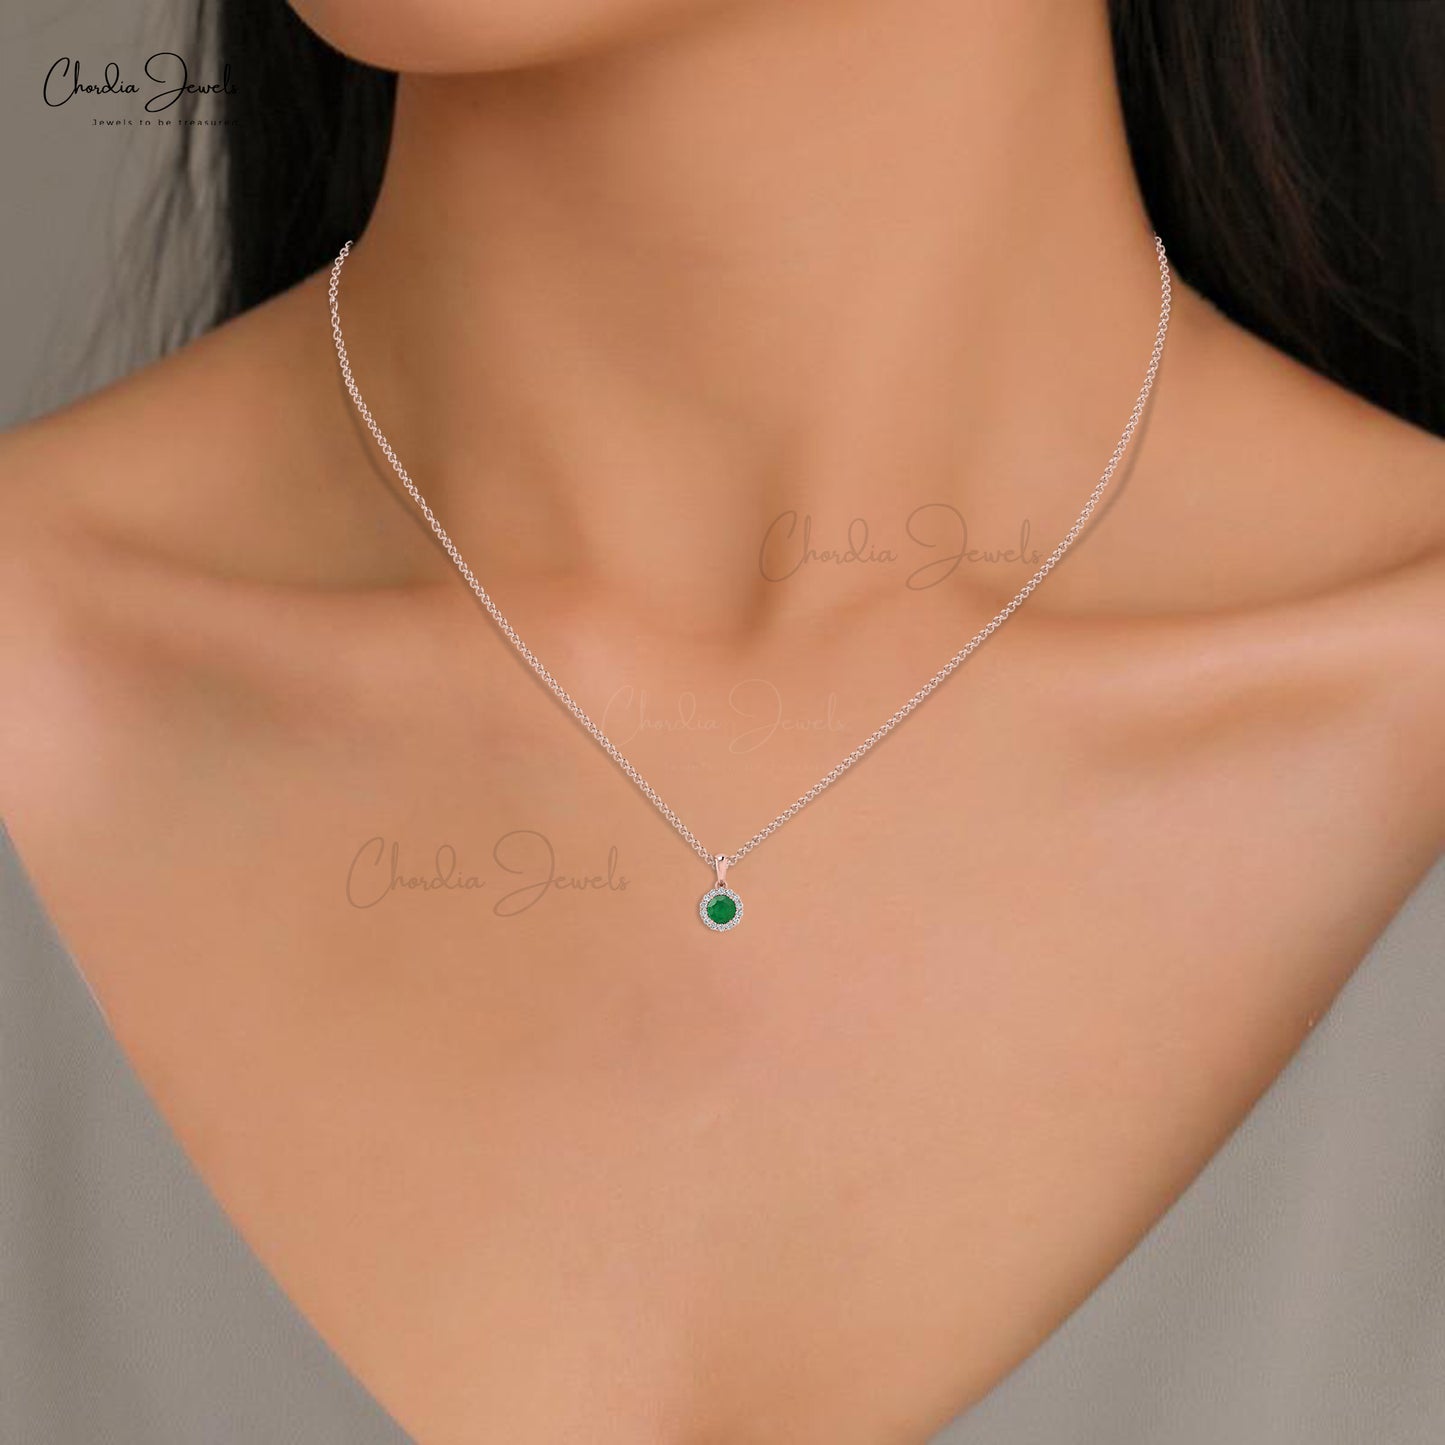 Emerald Bead, Diamond, Sterling Silver and Gold Necklace - Tandem Jewelry